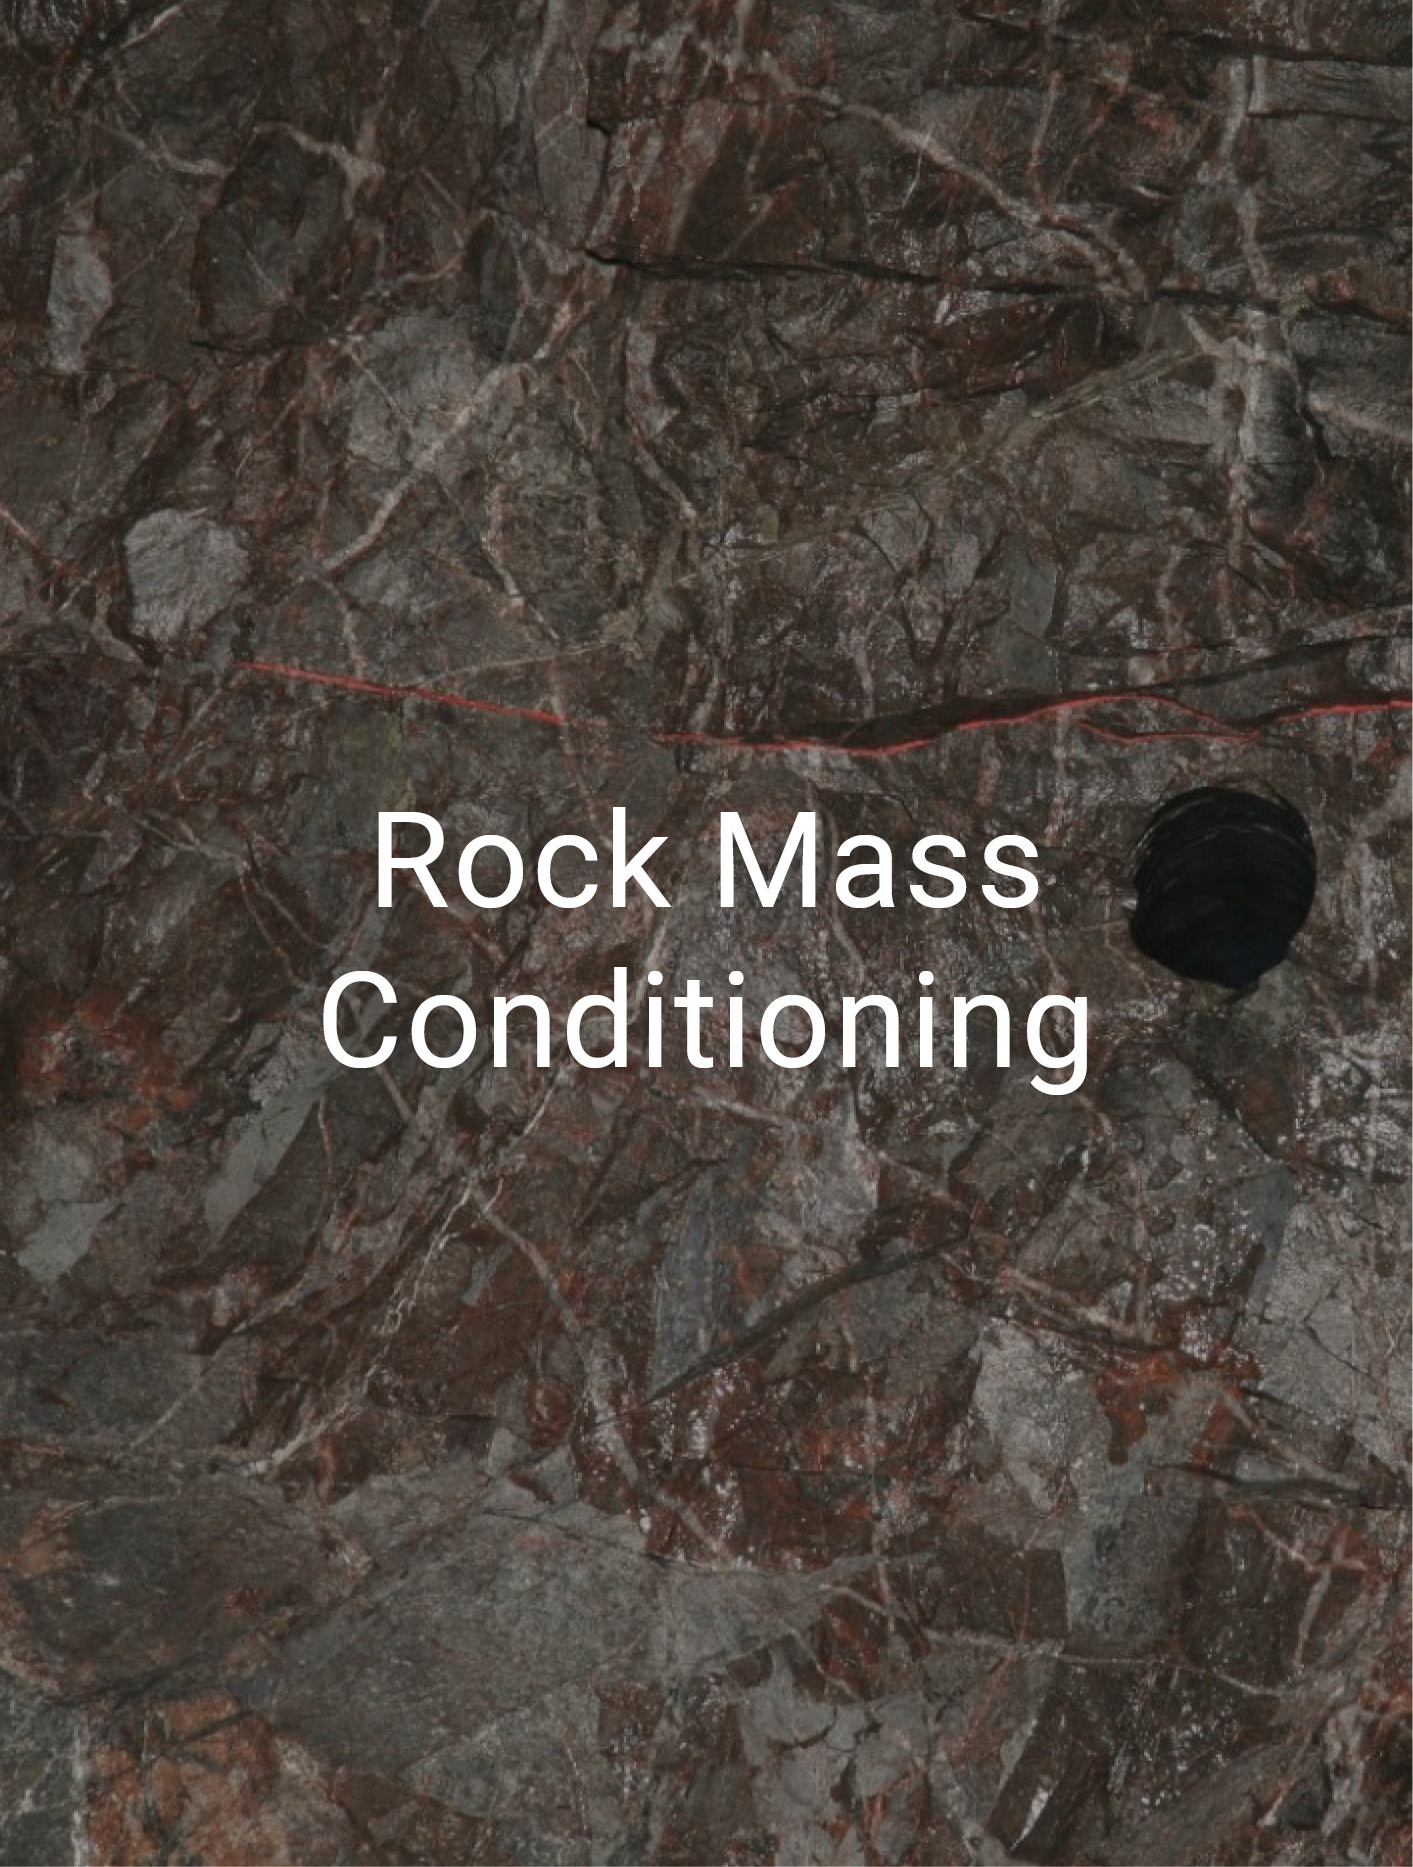 text 'Rock Mass Conditioning' over rock texture background'